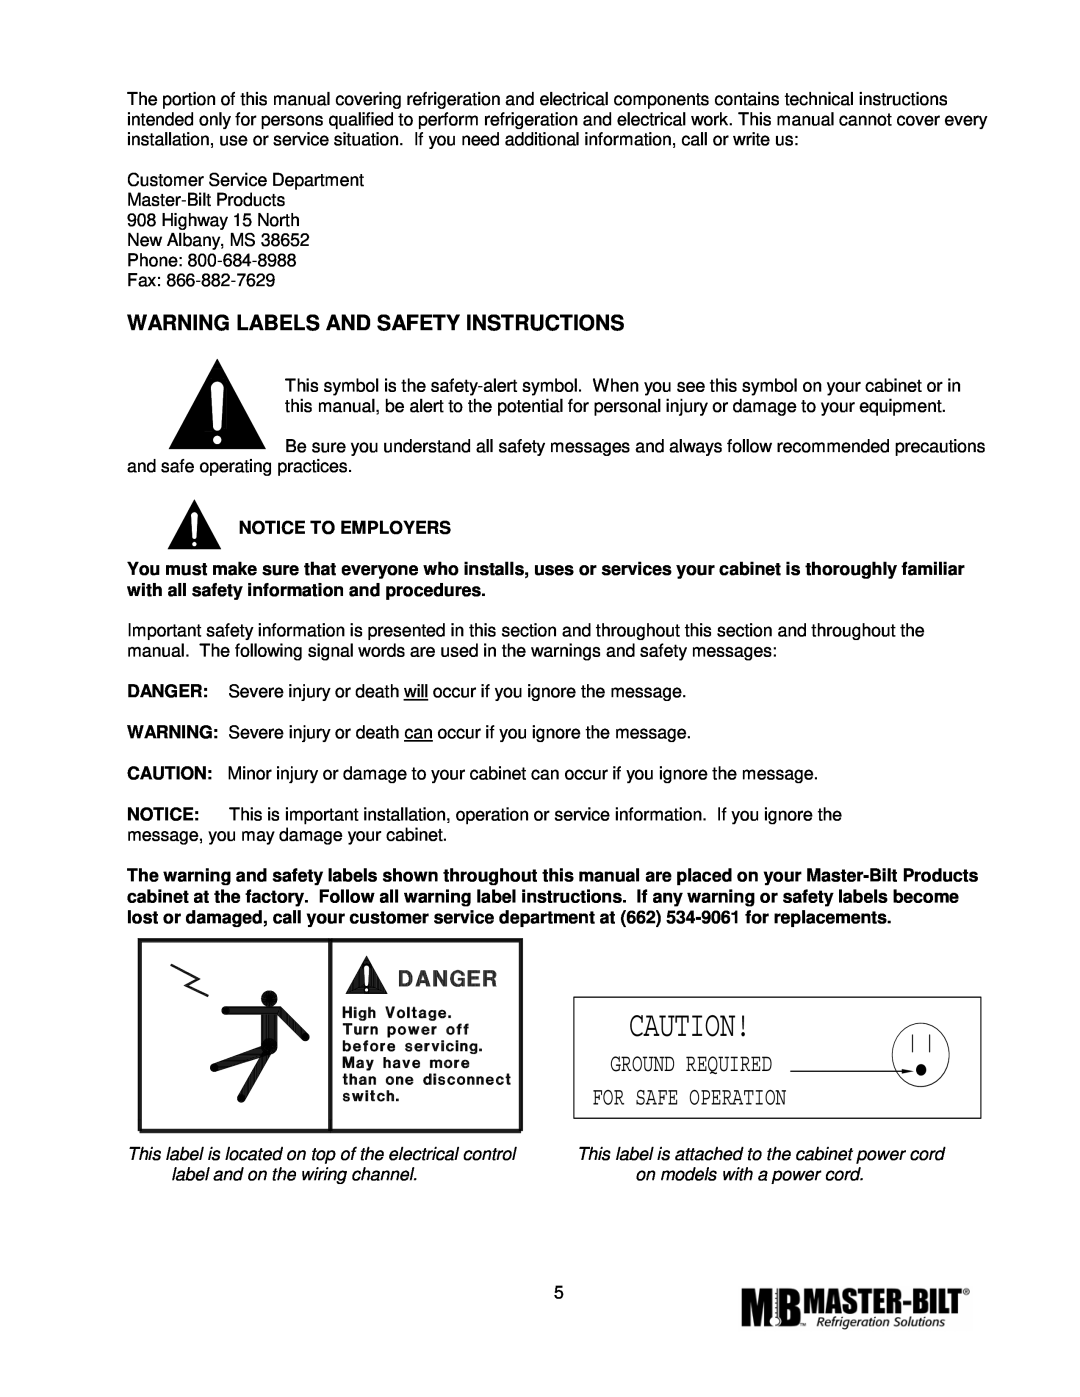 Master Bilt MPM-72 manual Warning Labels And Safety Instructions, Ground Required For Safe Operation 